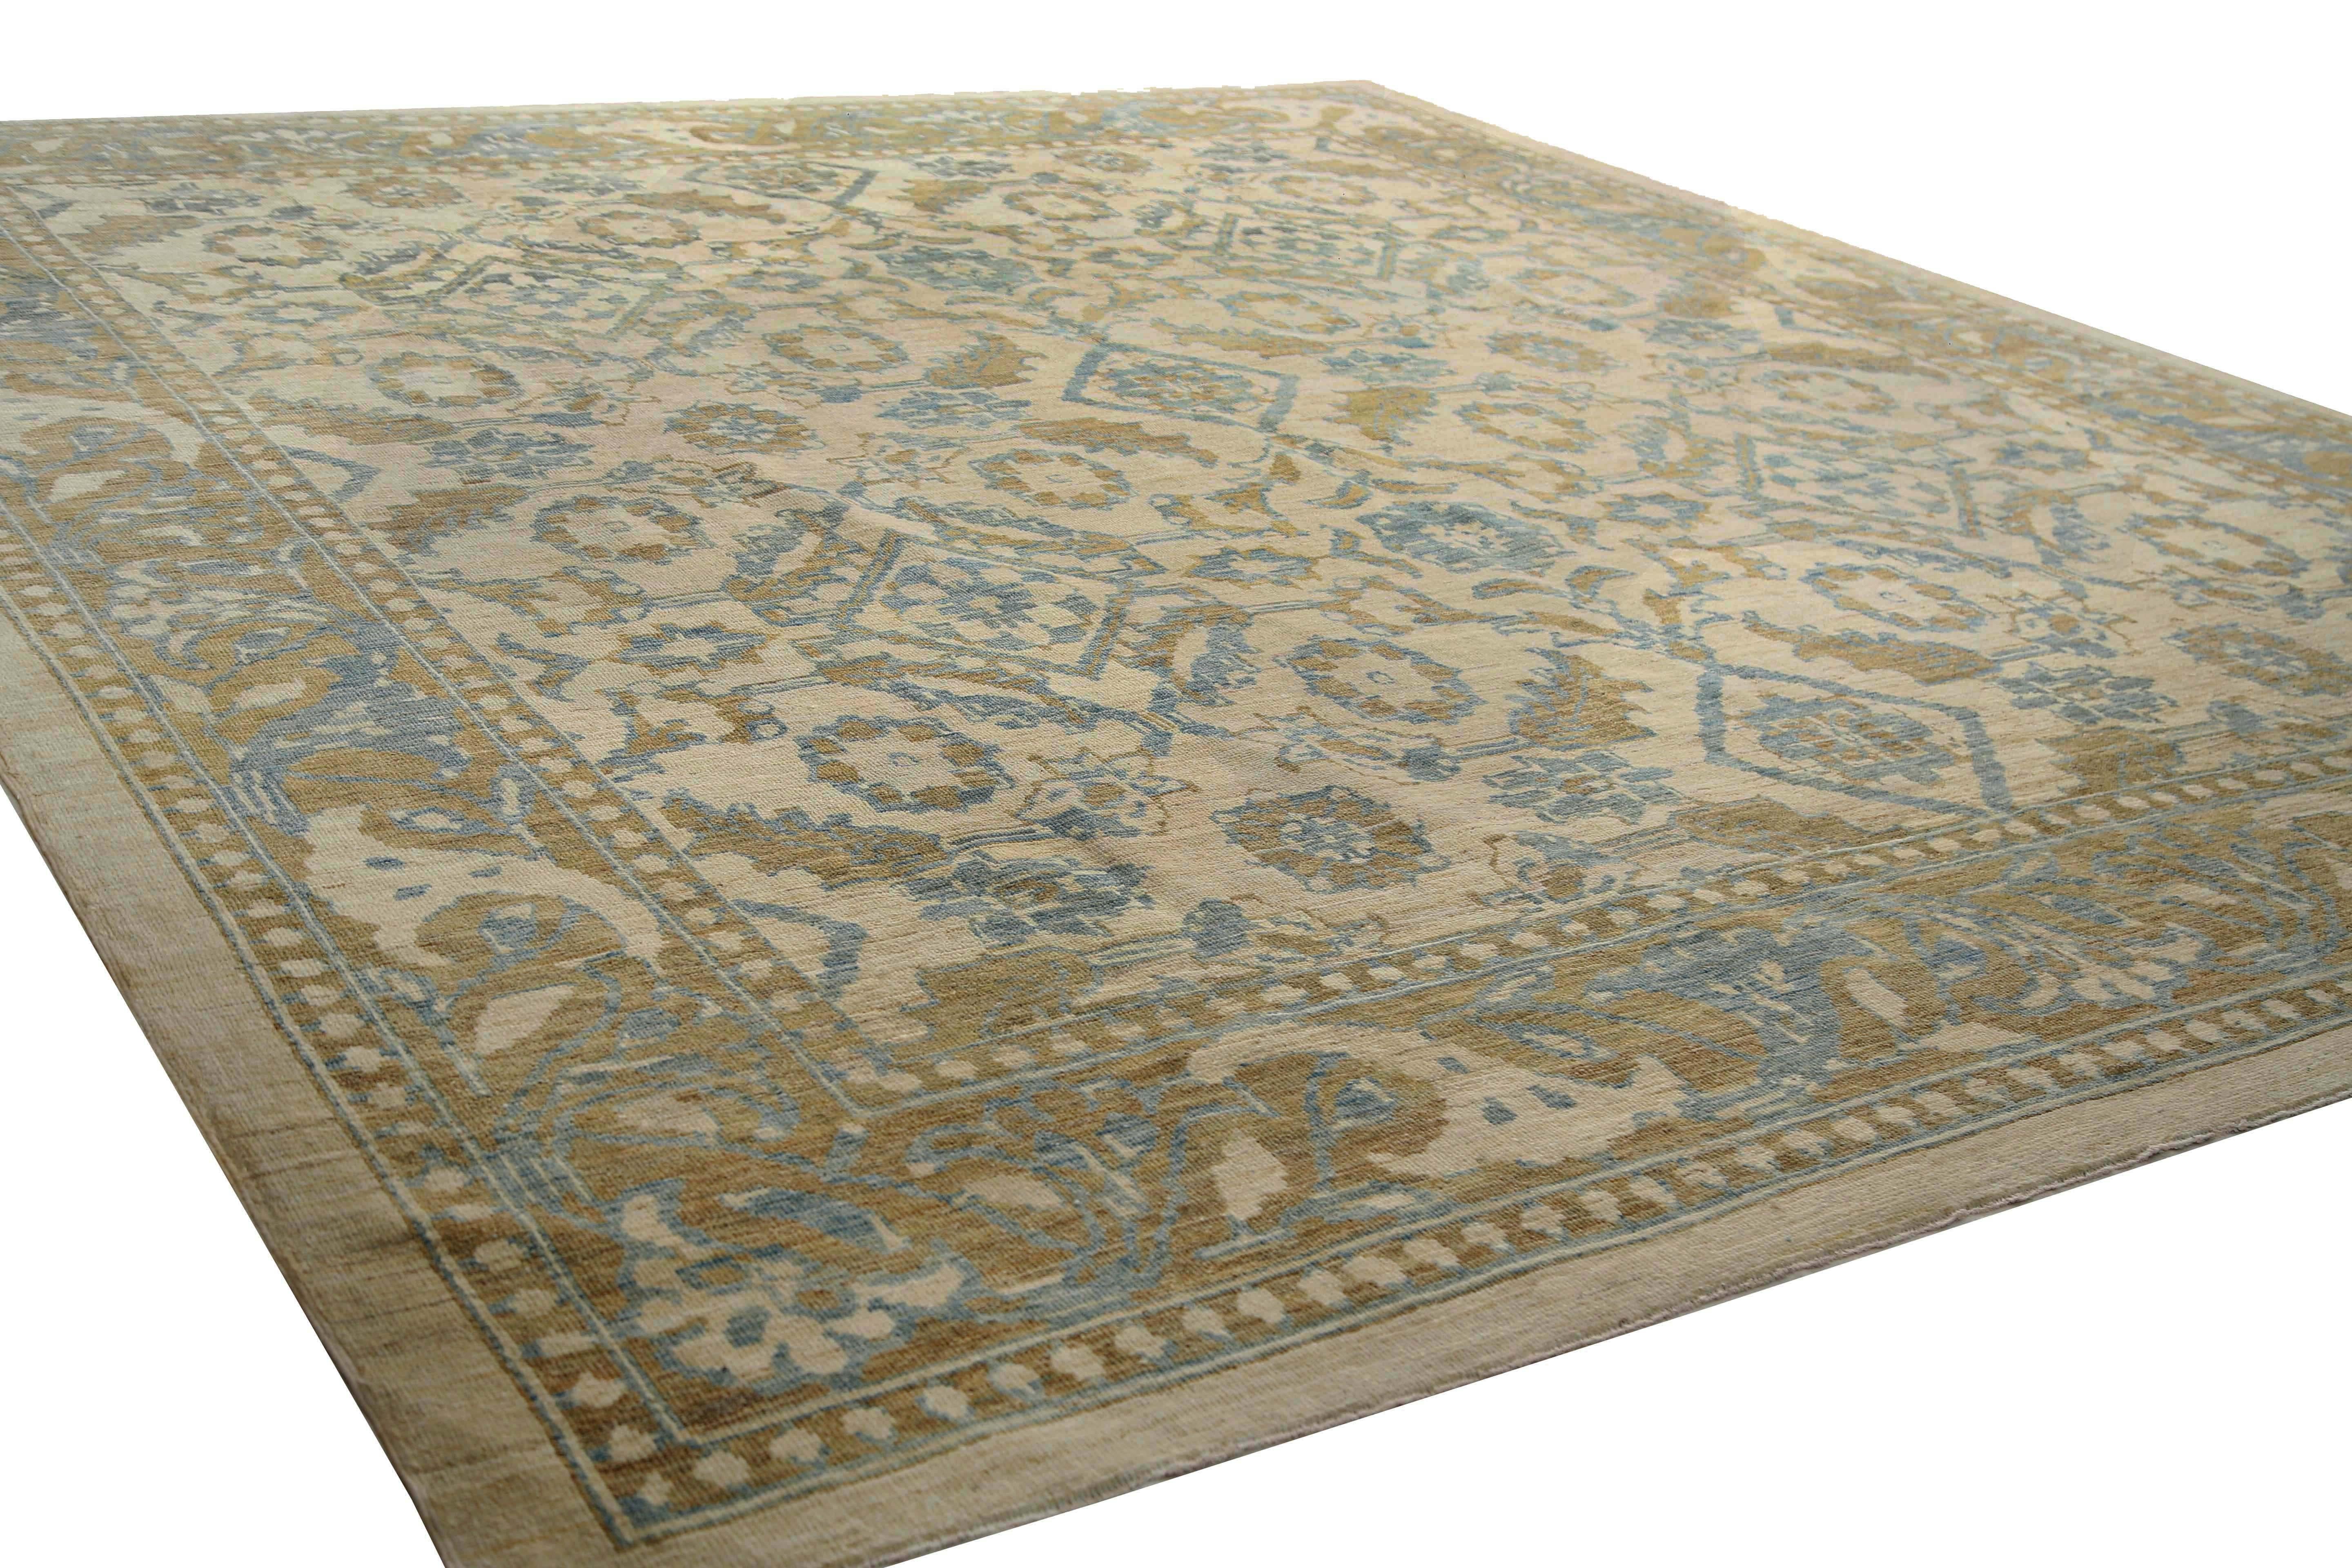 Luxurious Handmade Sultanabad Rug - Transitional Design, Blue, Green, and Yellow In New Condition For Sale In Dallas, TX